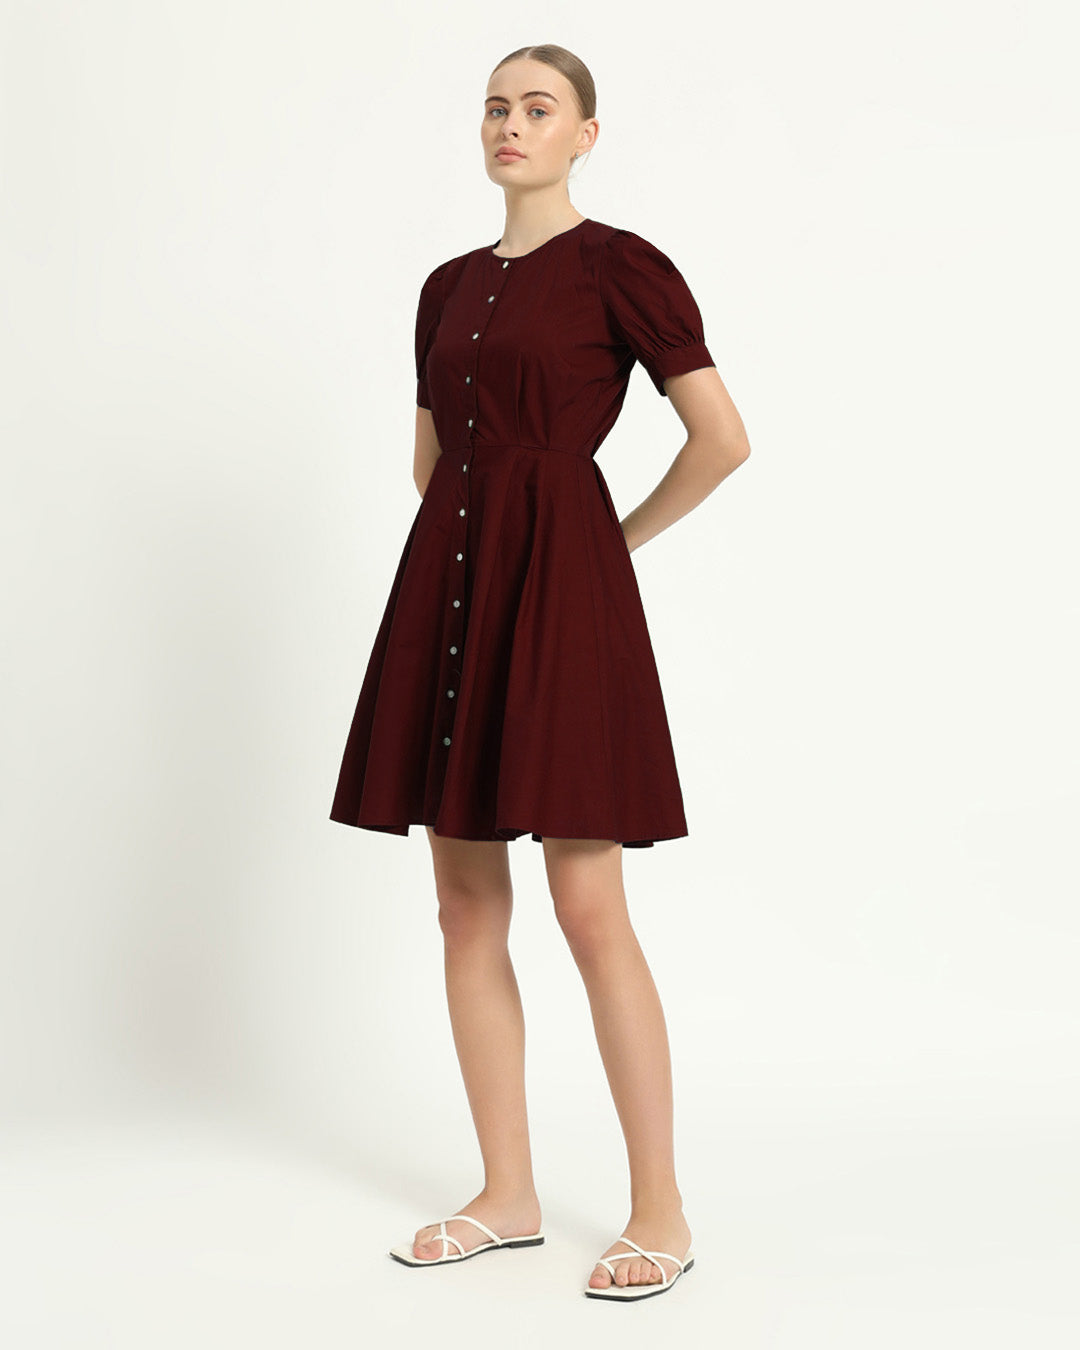 The Kittsee Rouge Cotton Dress